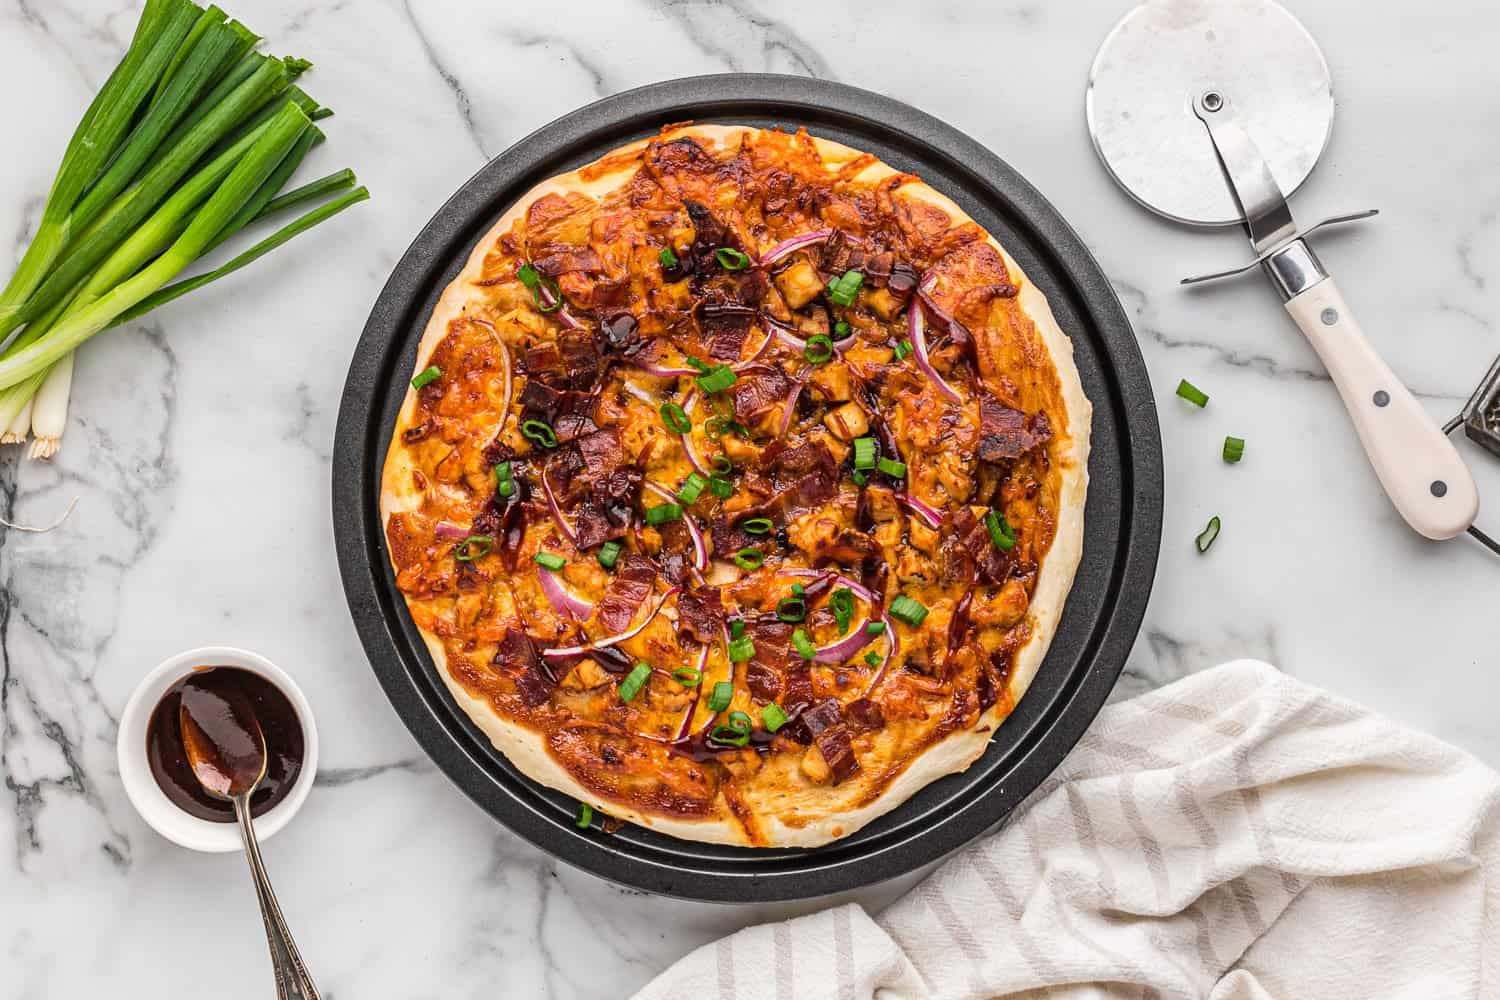 Cooked pizza topped with green onions.